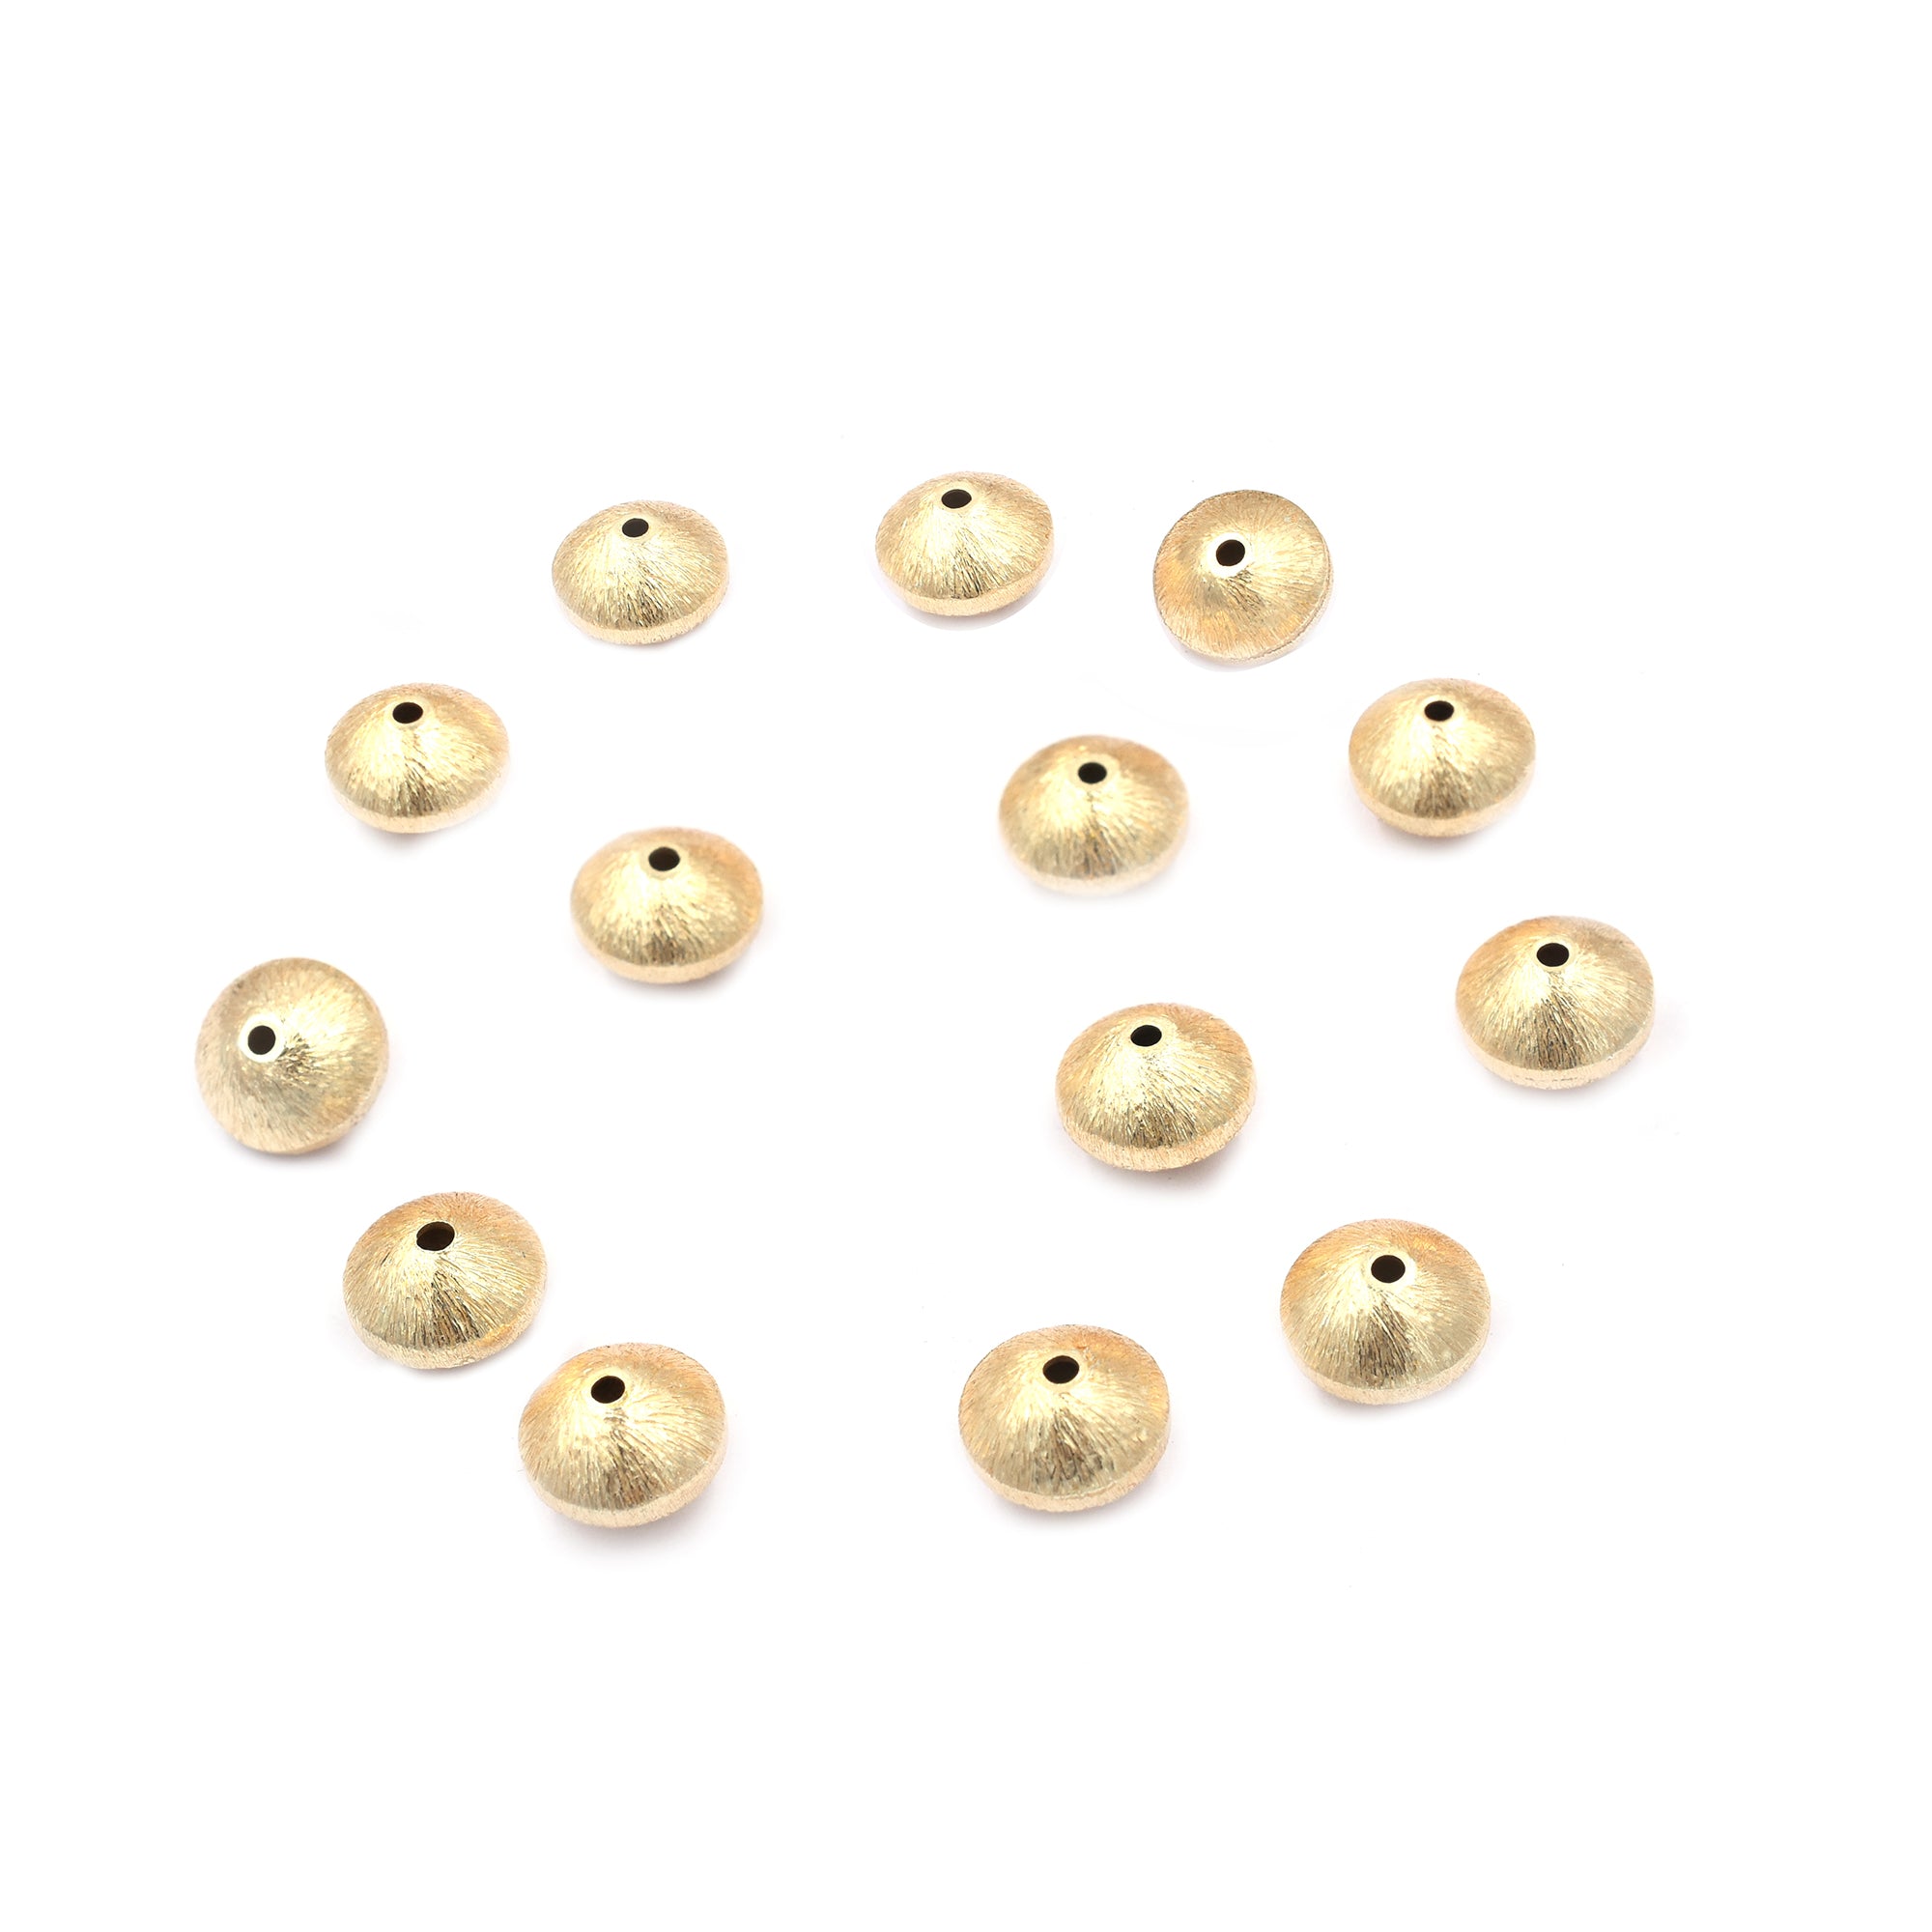 30 Pcs 10mm Bicone Brushed Matte Finish Beads Gold Plated Copper